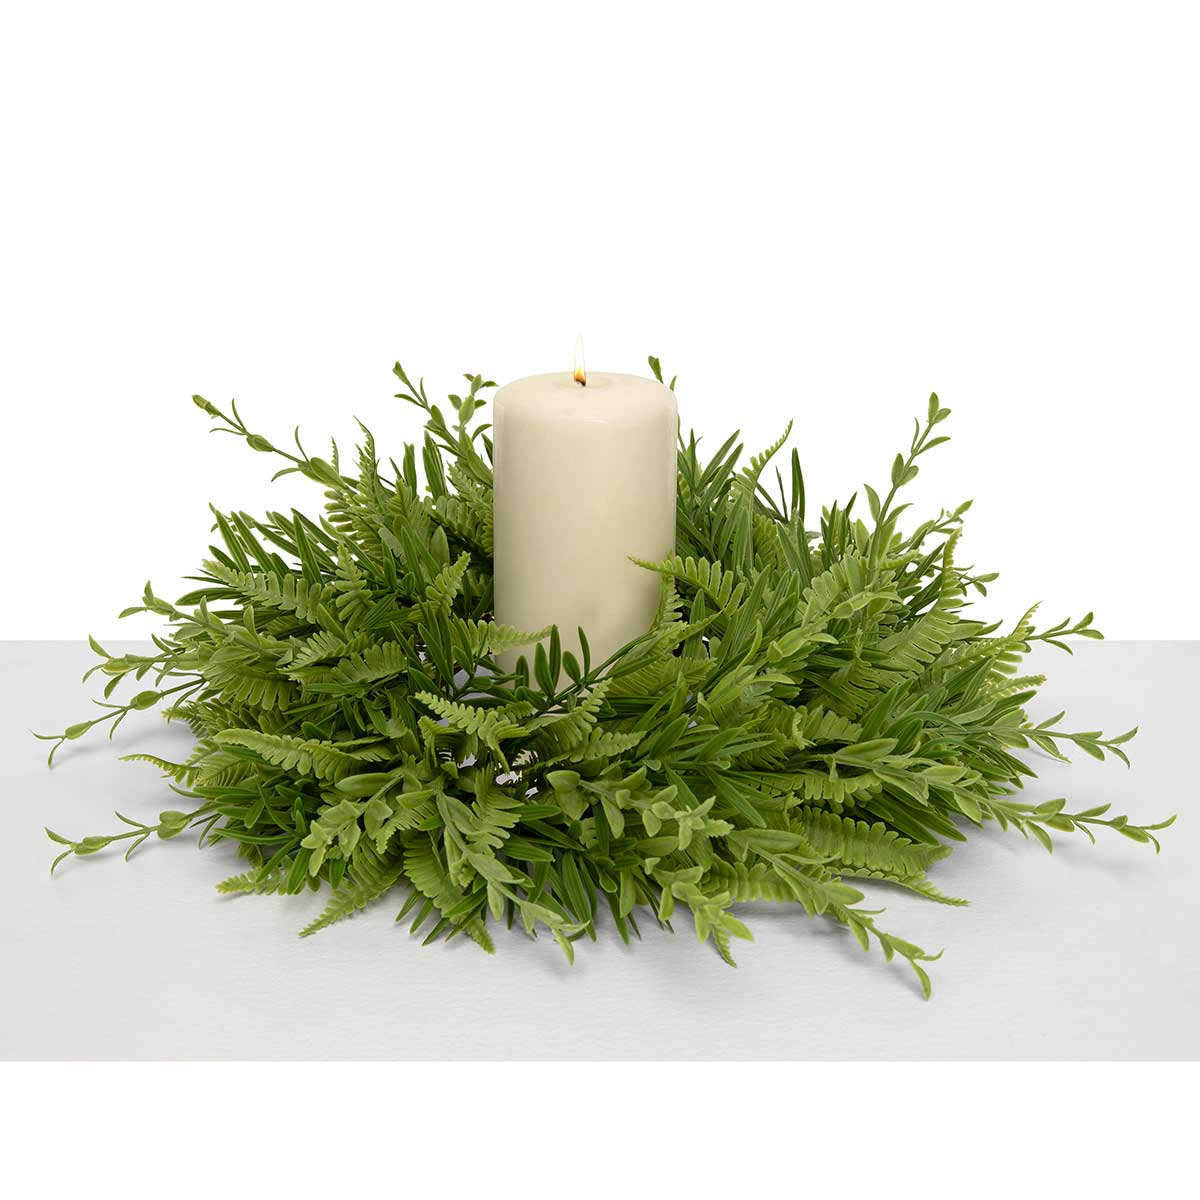 WREATH ROSEMARY/FERN 16IN (INNER RING 5.5IN) - Click Image to Close